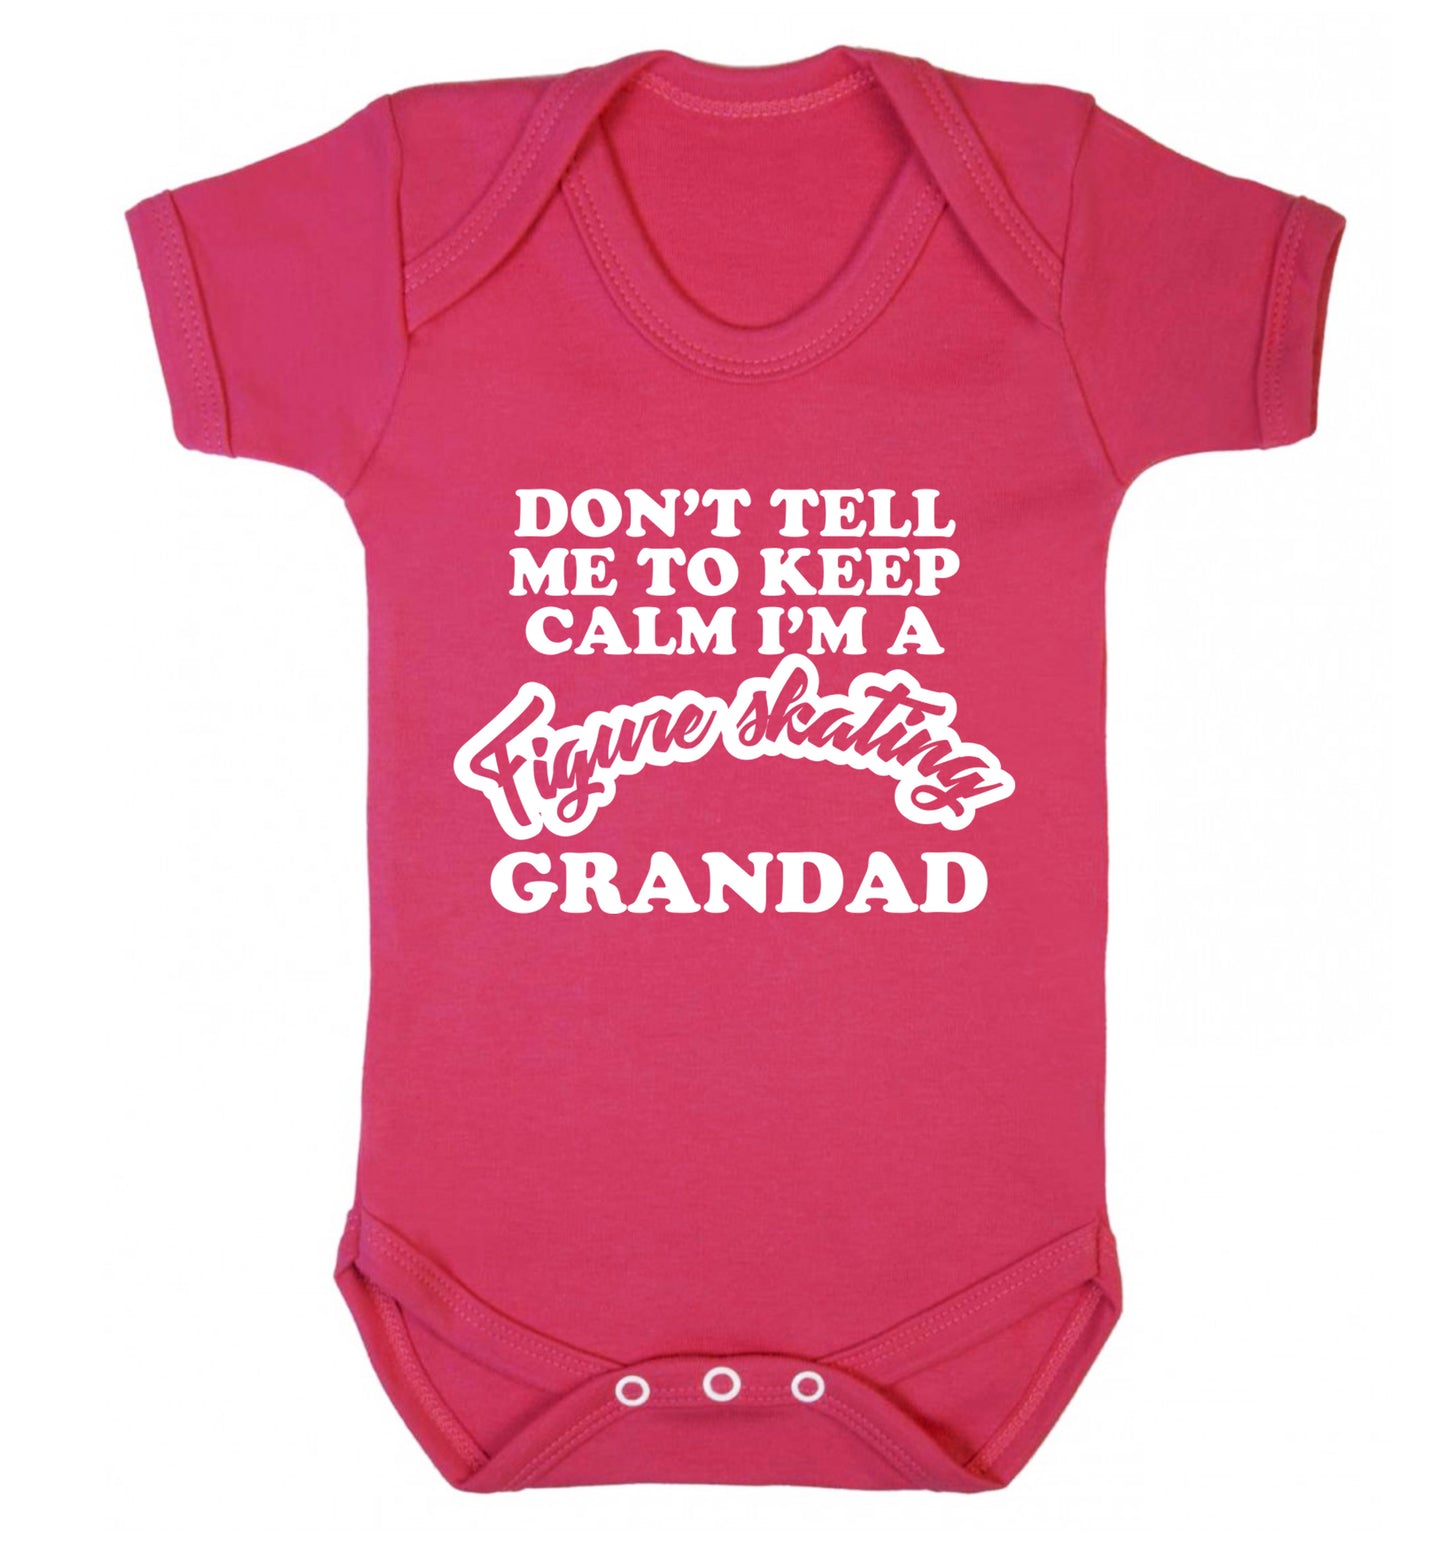 Don't tell me to keep calm I'm a figure skating grandad Baby Vest dark pink 18-24 months